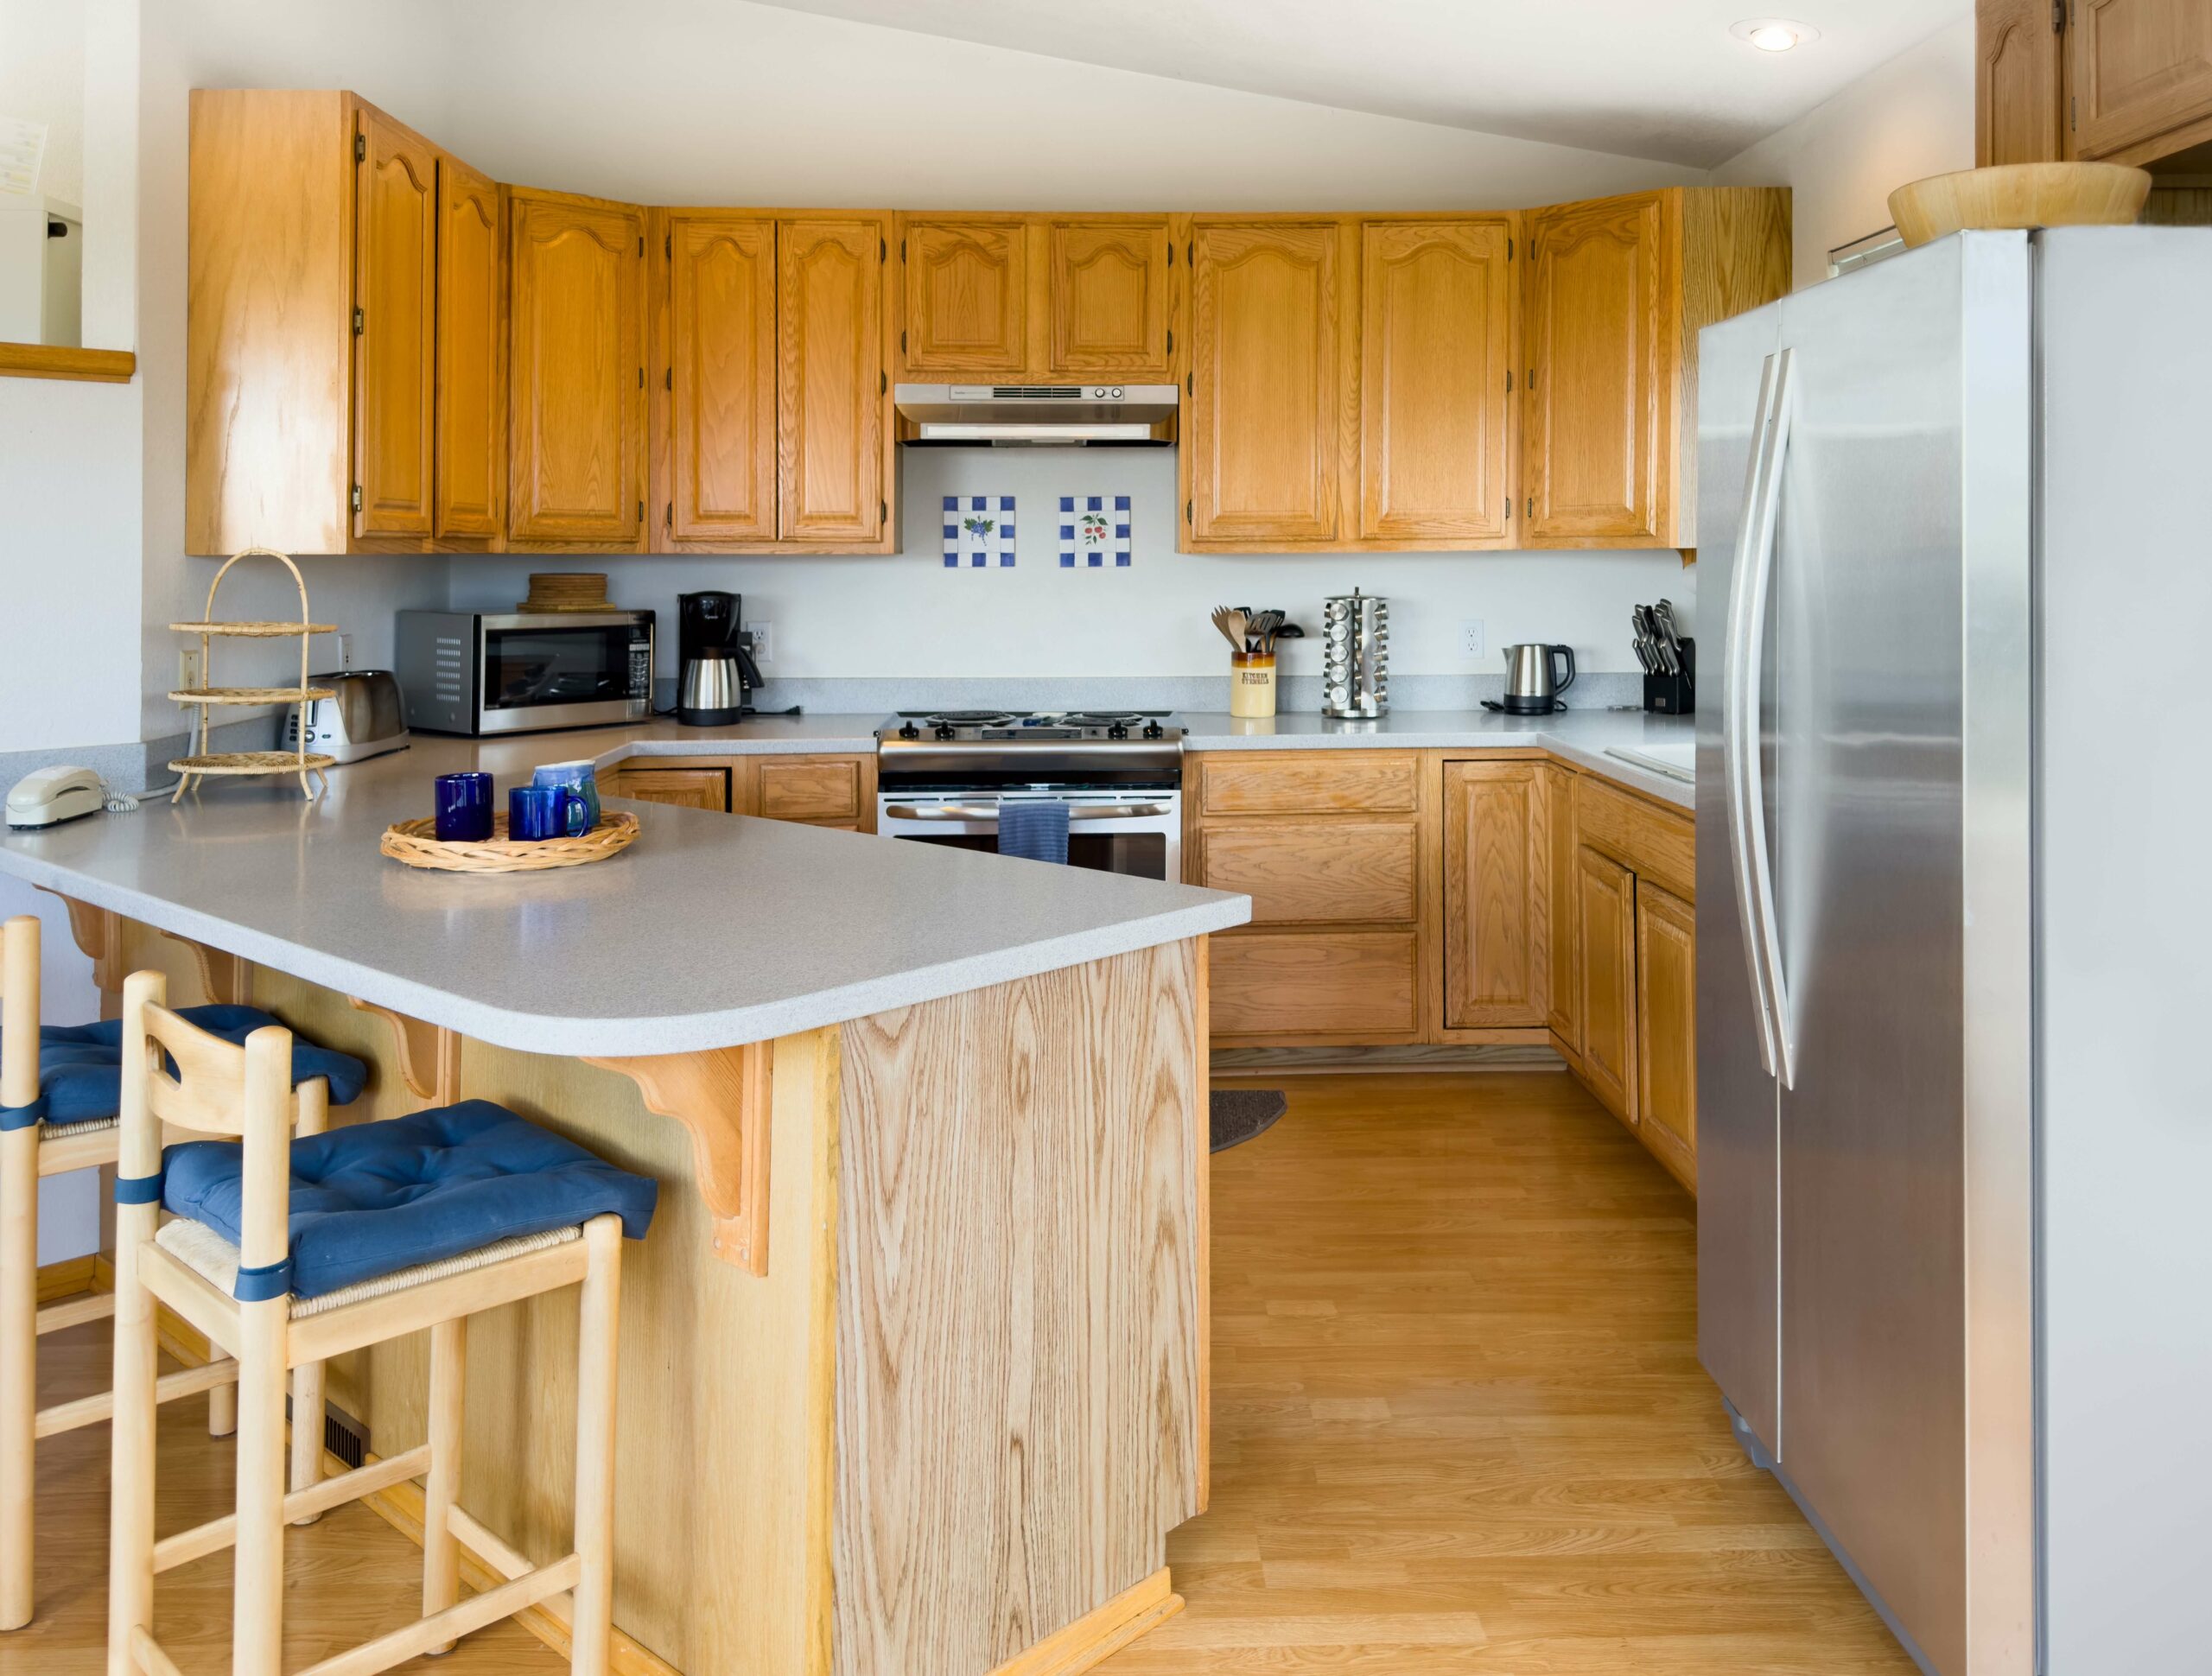 Mare Vista: kitchen with wood cabinets, floors and breakfast bar.